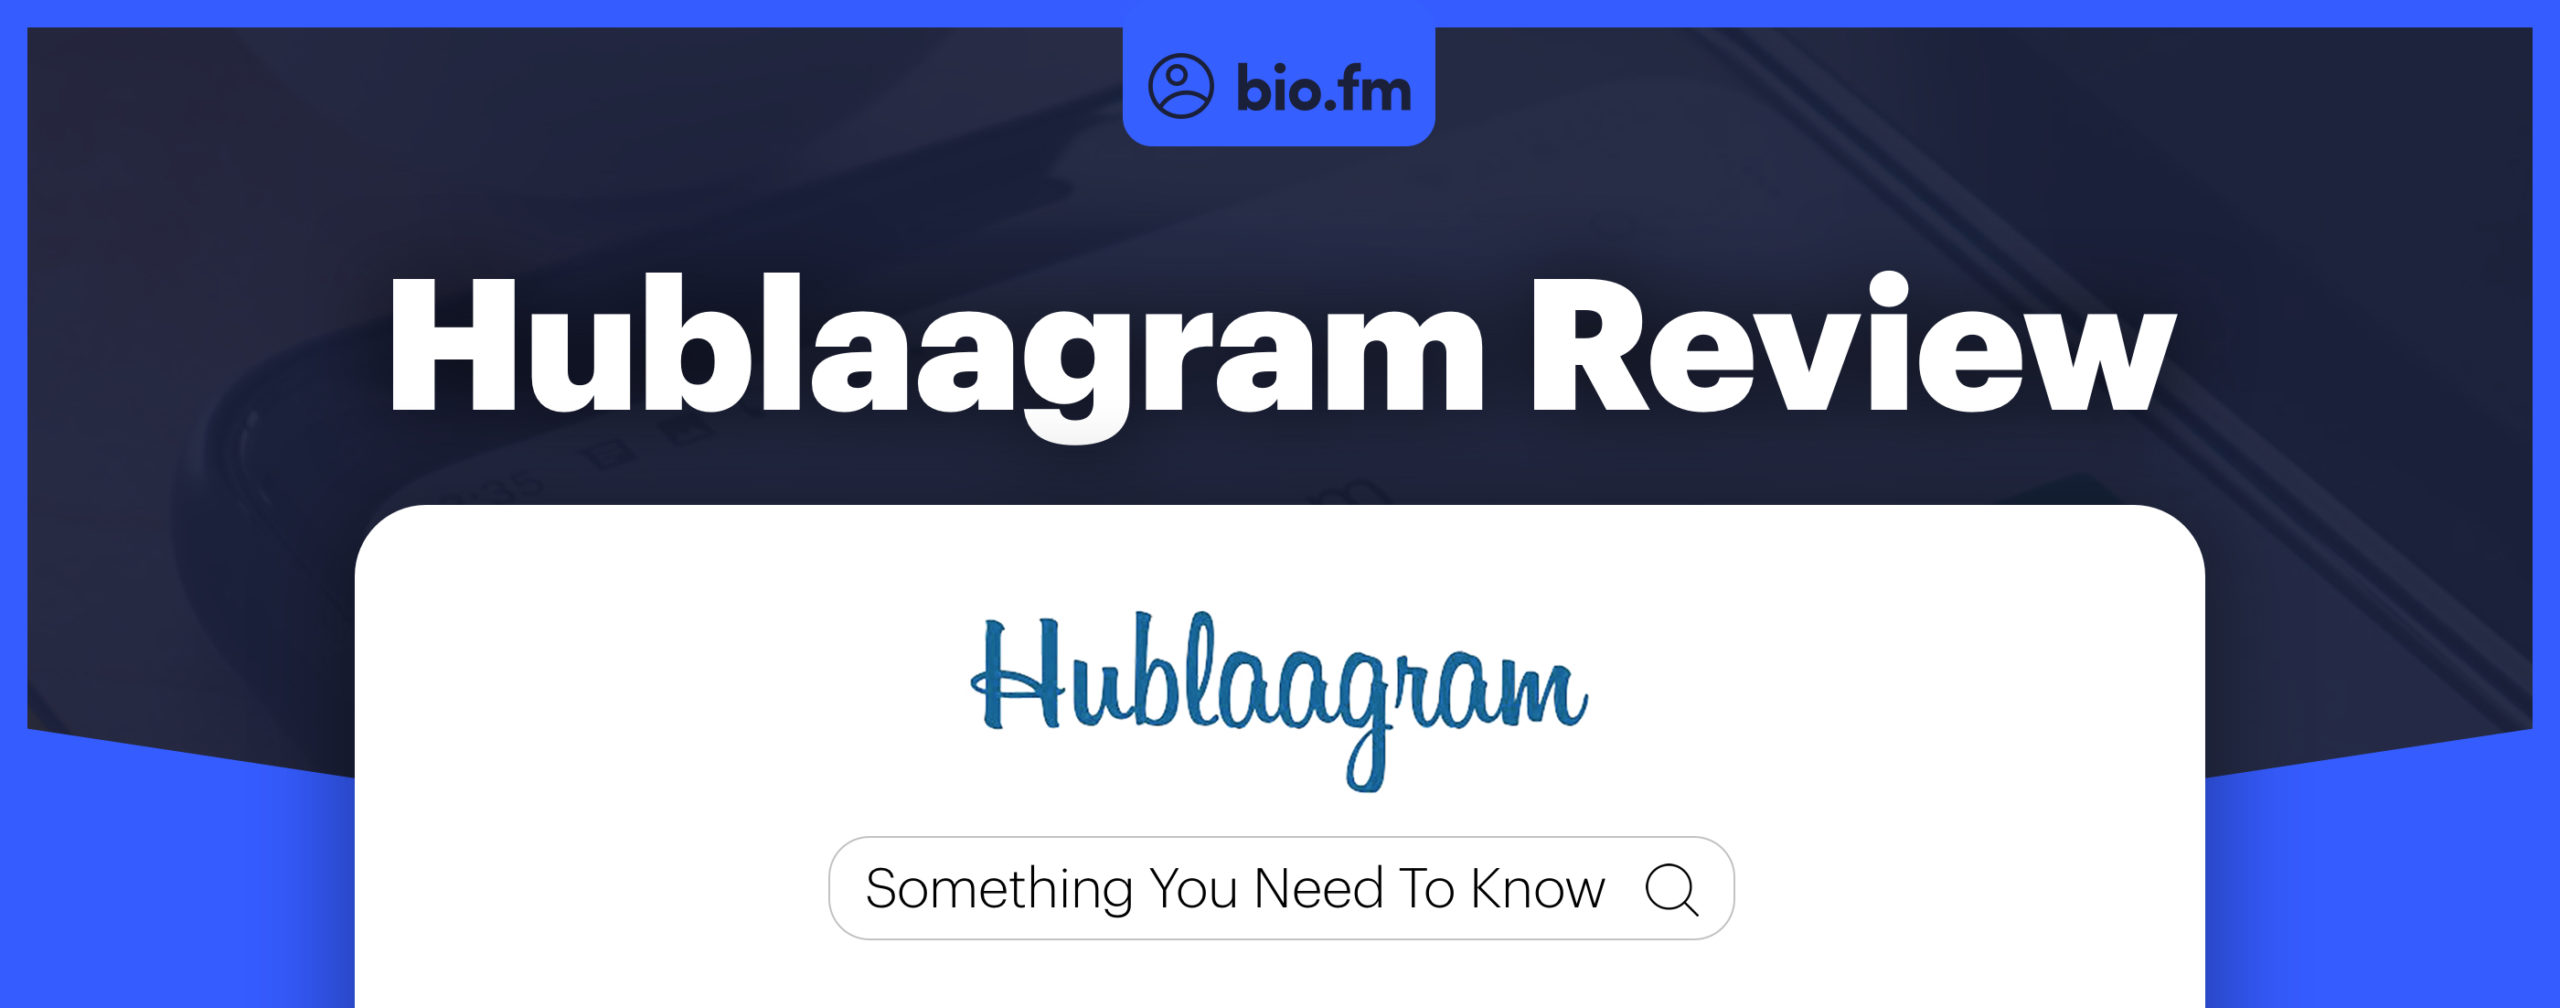 hublaagram review featured image